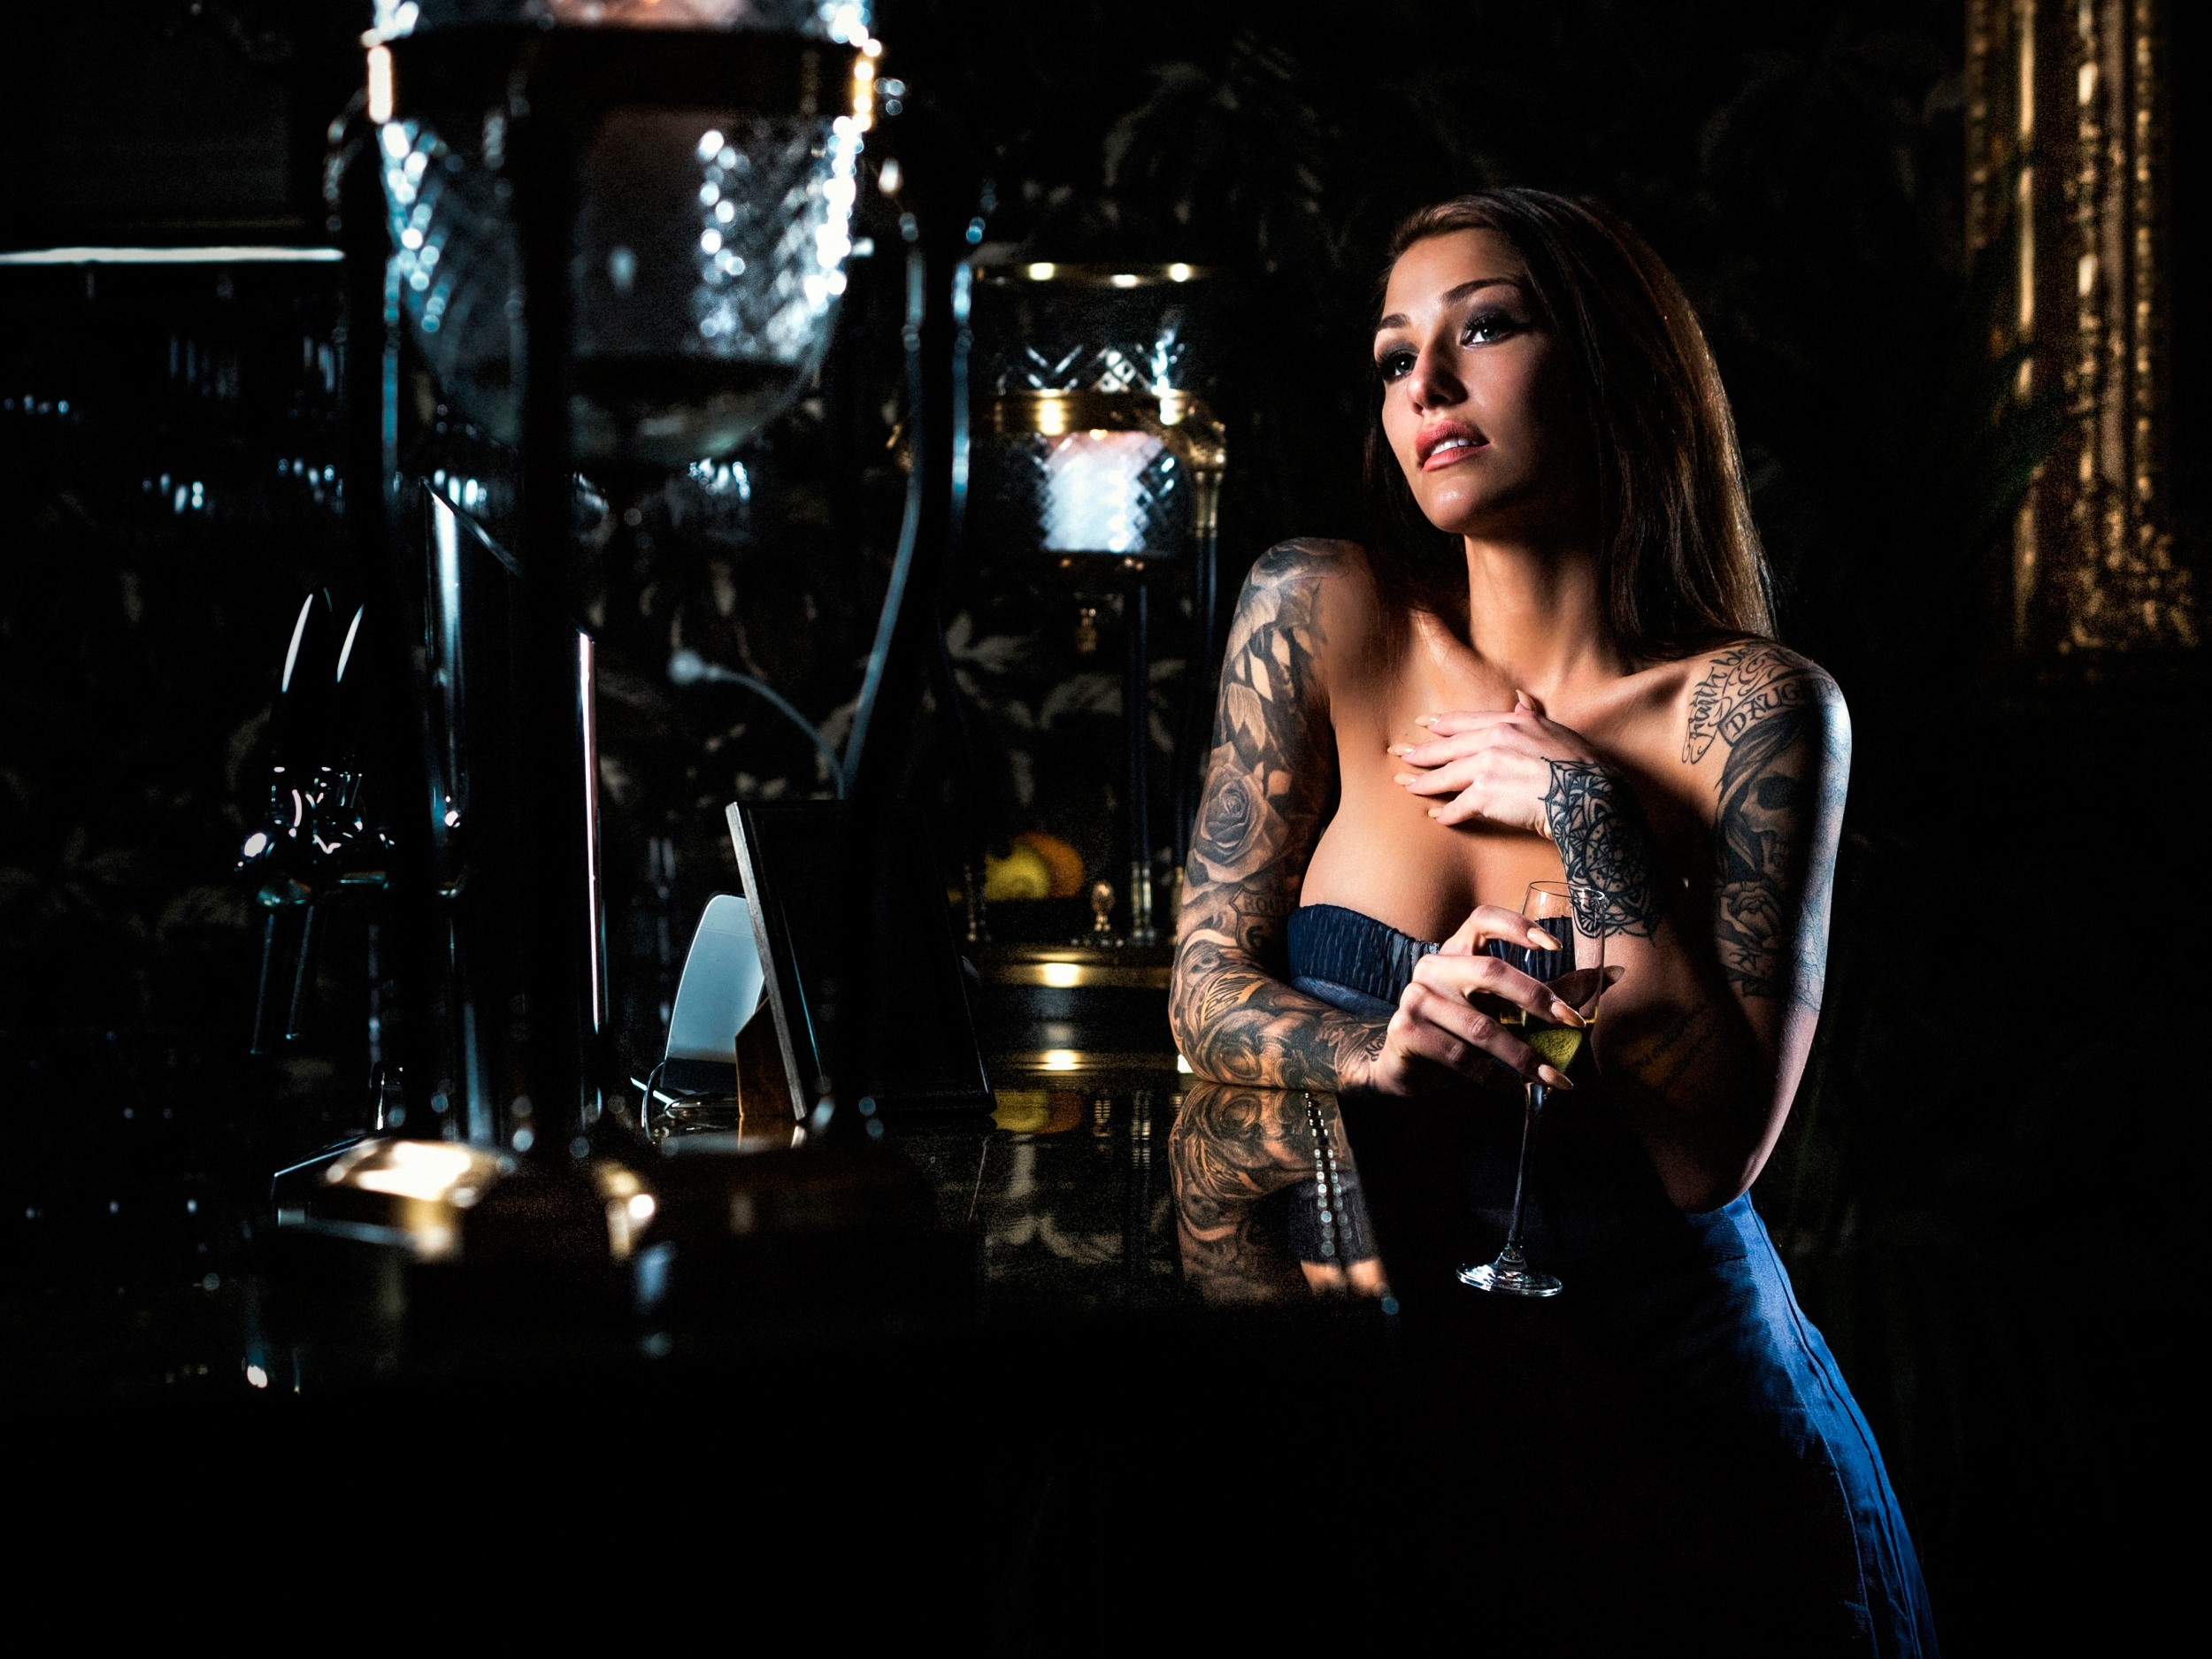 People 2500x1875 women model drinking glass bar women indoors indoors boobs inked girls looking away blue clothing low light